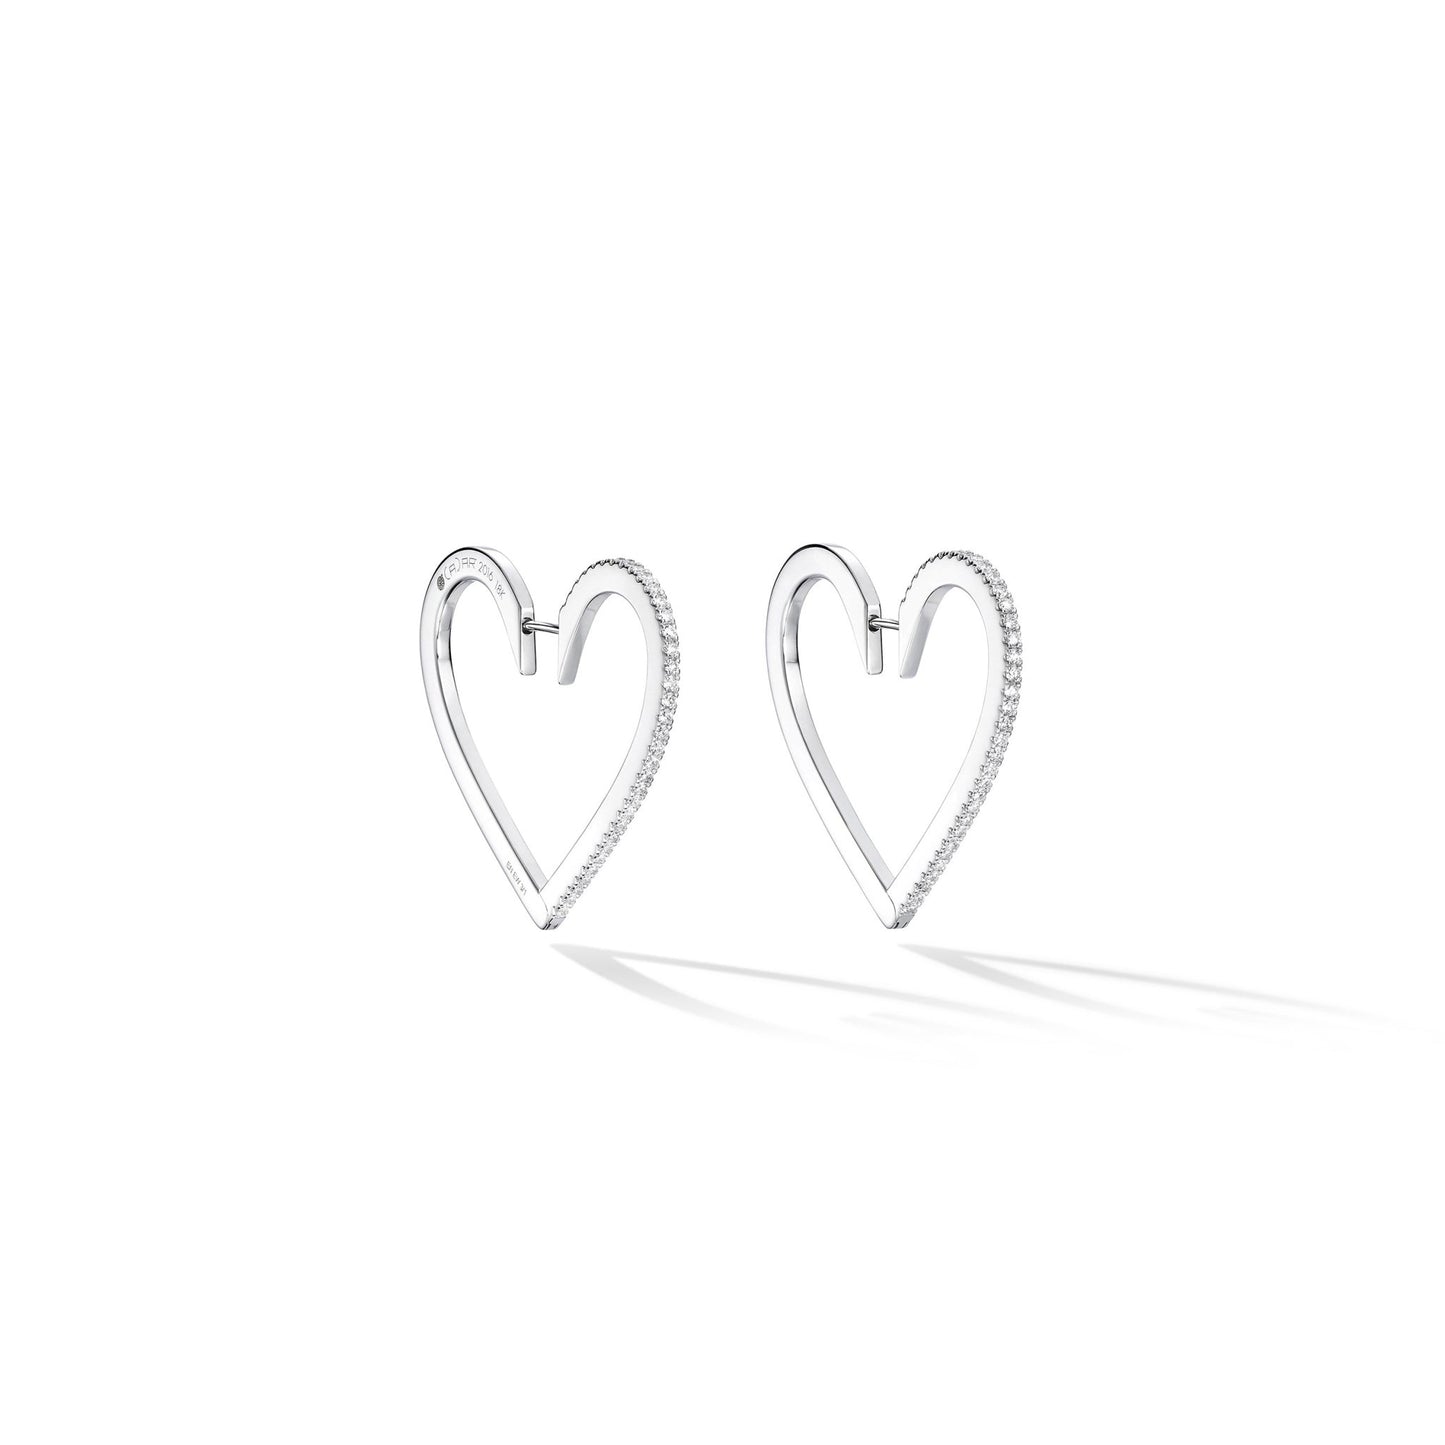 Large White Gold Endless Hoop Earrings with White Diamonds - Cadar